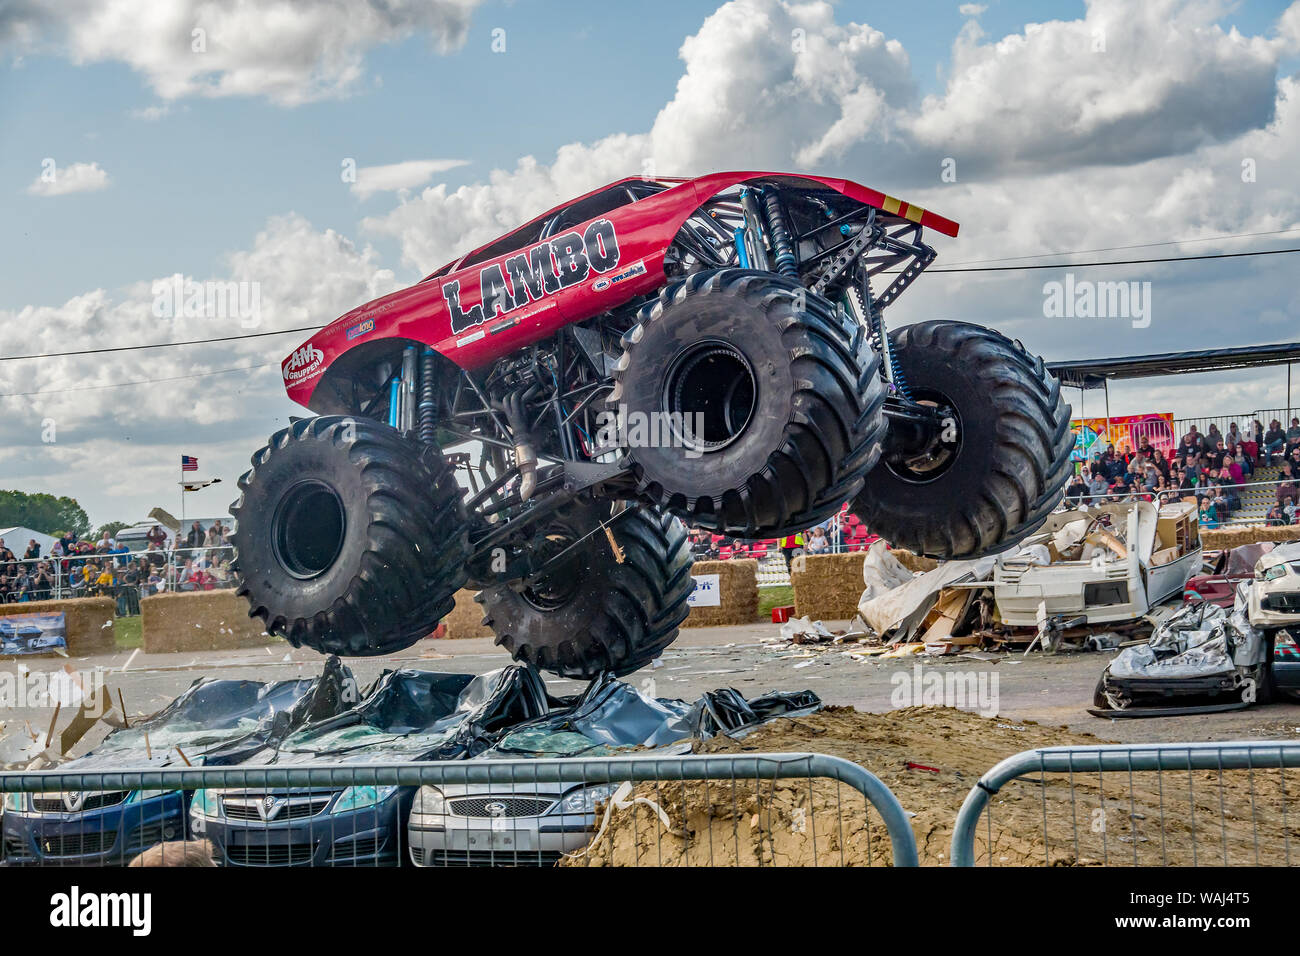 The Lambo monster truck airborne whilst jumping over a stack of scrap cars  during a demonstration at a monster truck show Stock Photo - Alamy